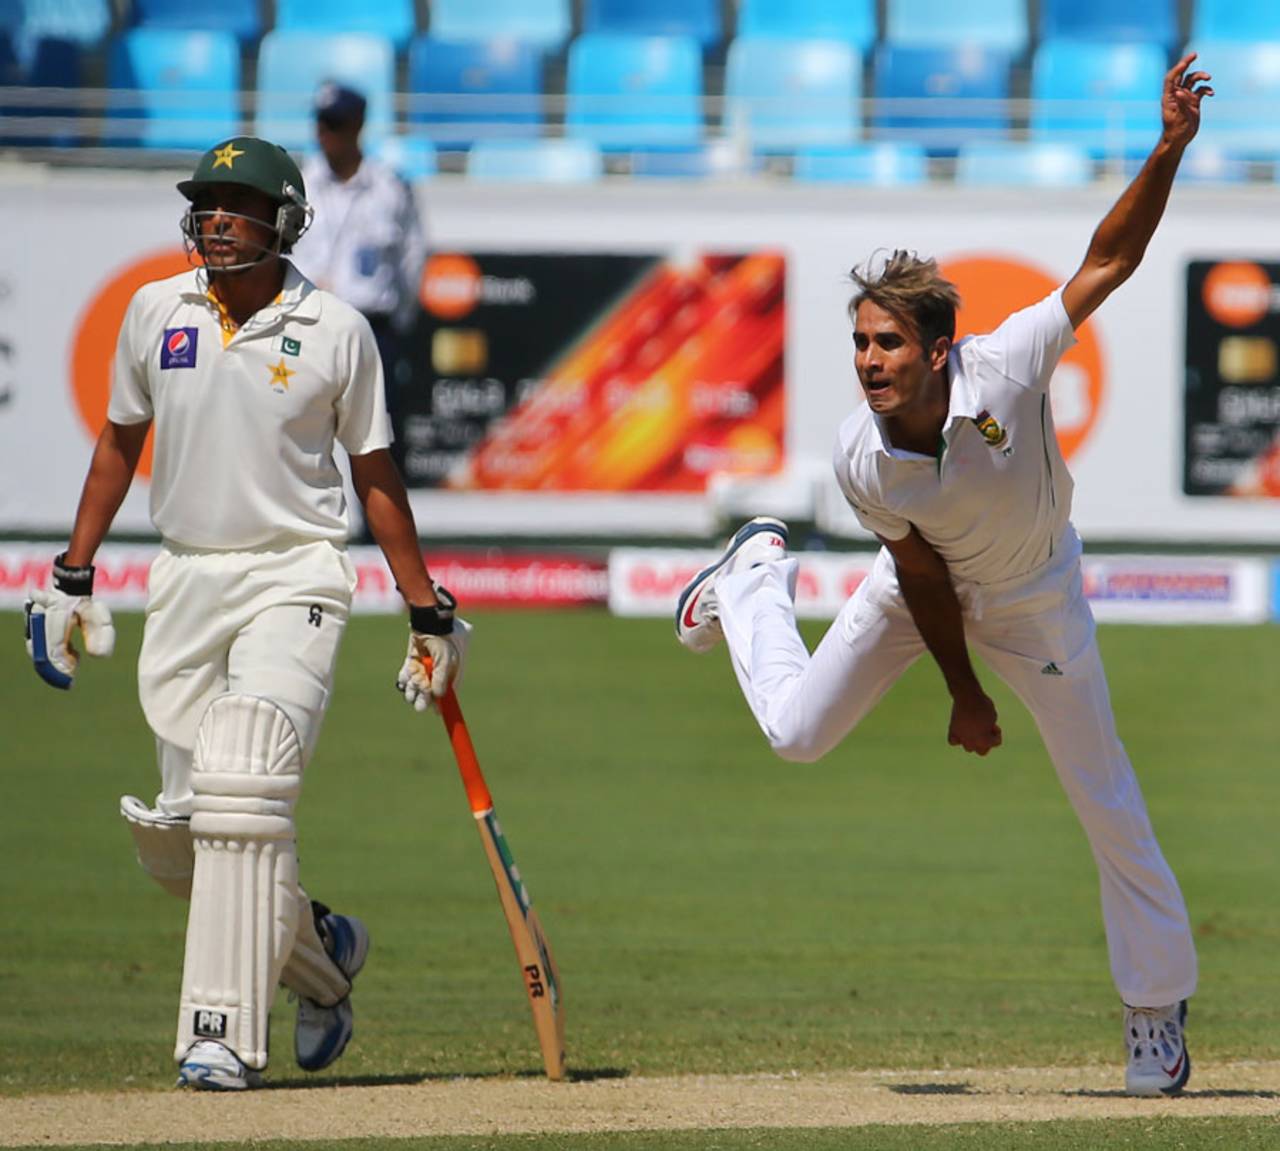 Imran Tahir in his delivery stride, Pakistan v South Africa, 2nd Test, 1st day, Dubai, October 23, 2013